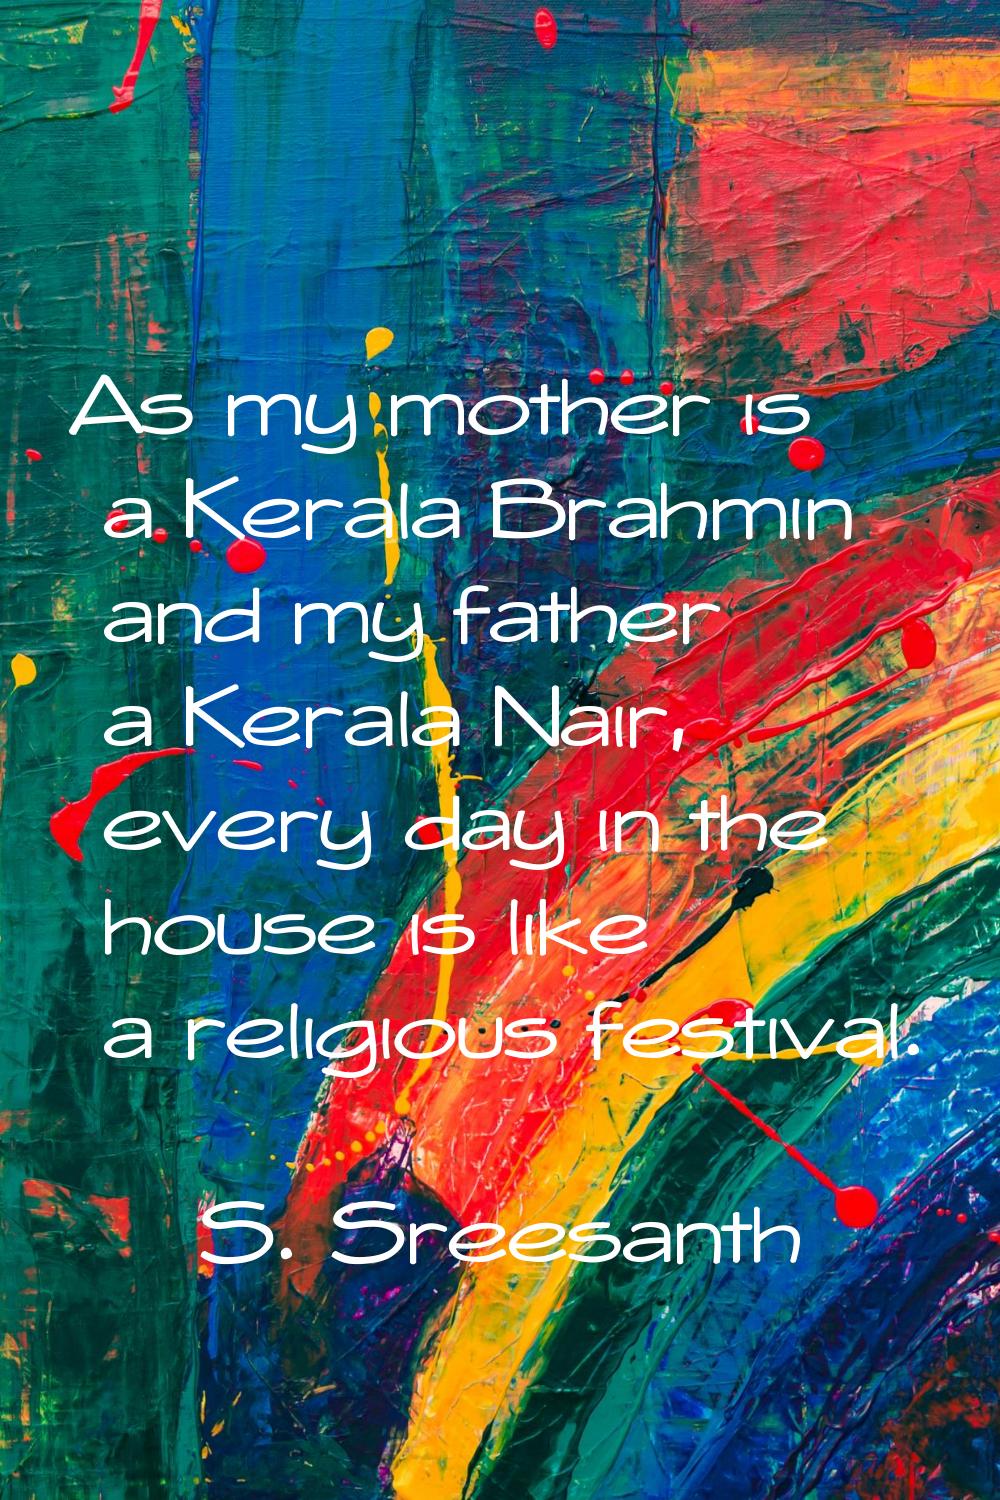 As my mother is a Kerala Brahmin and my father a Kerala Nair, every day in the house is like a reli